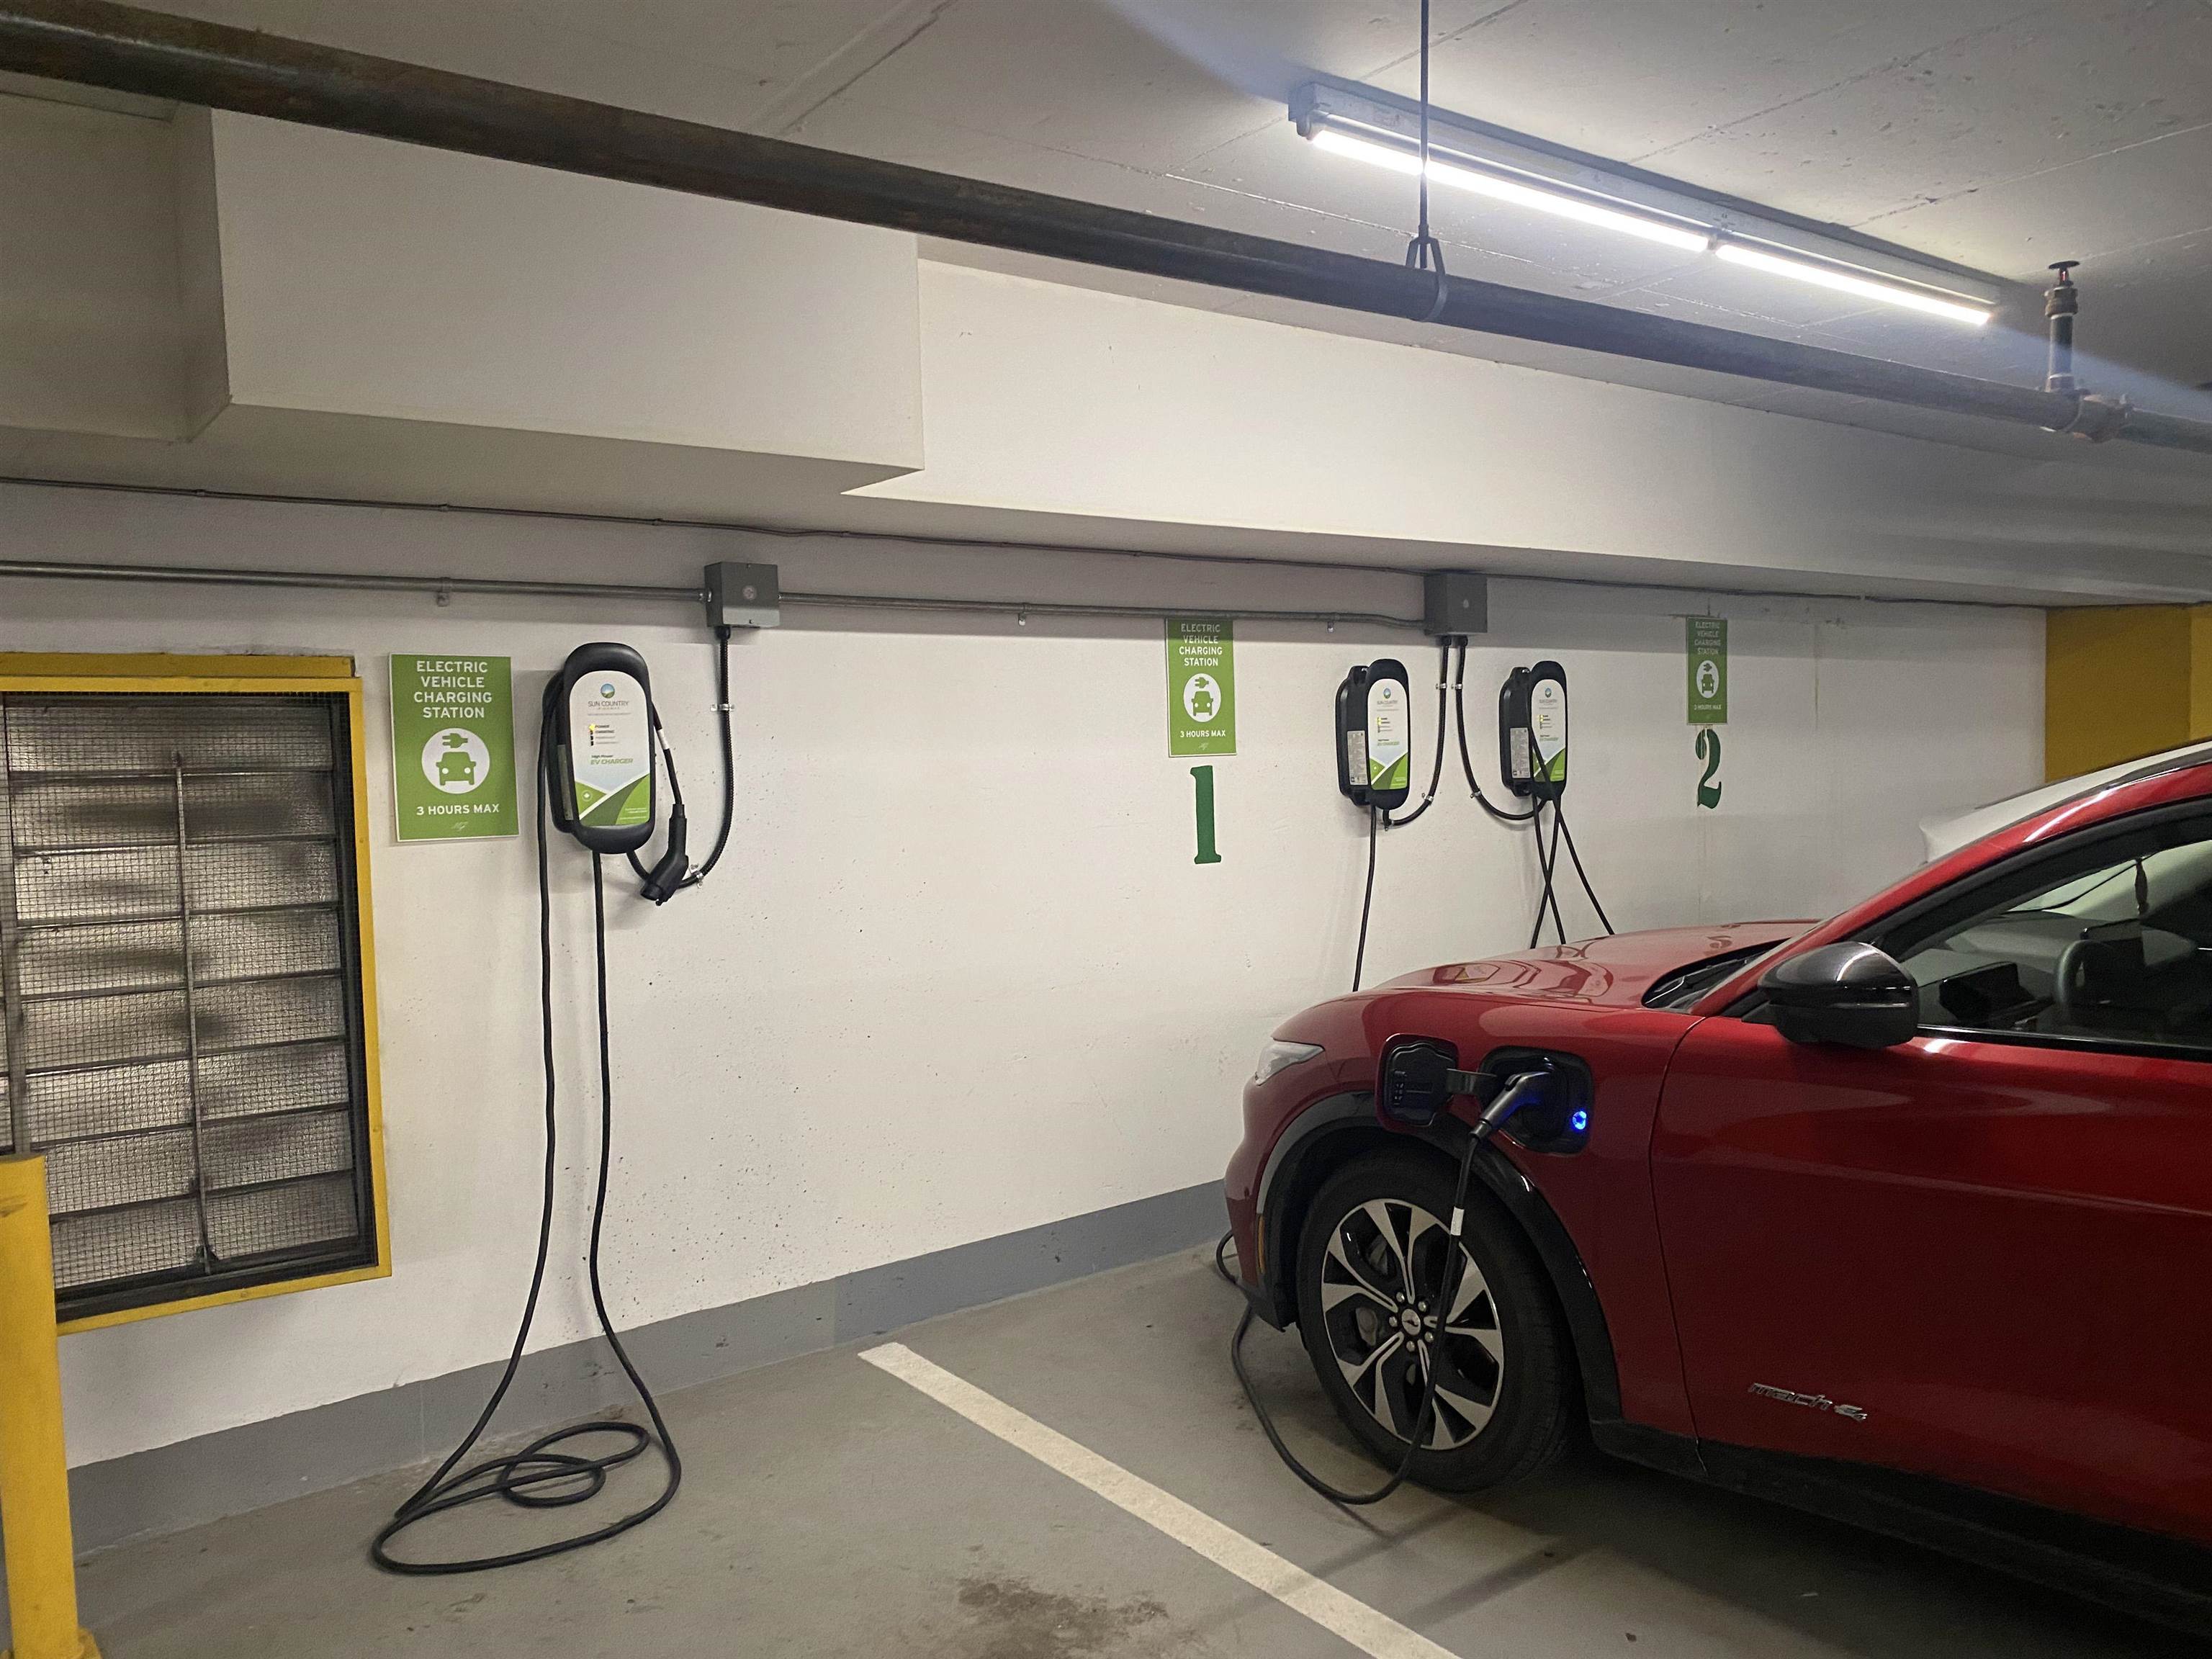 2 parking spots, side by side. 4 EV chargers available for residents.